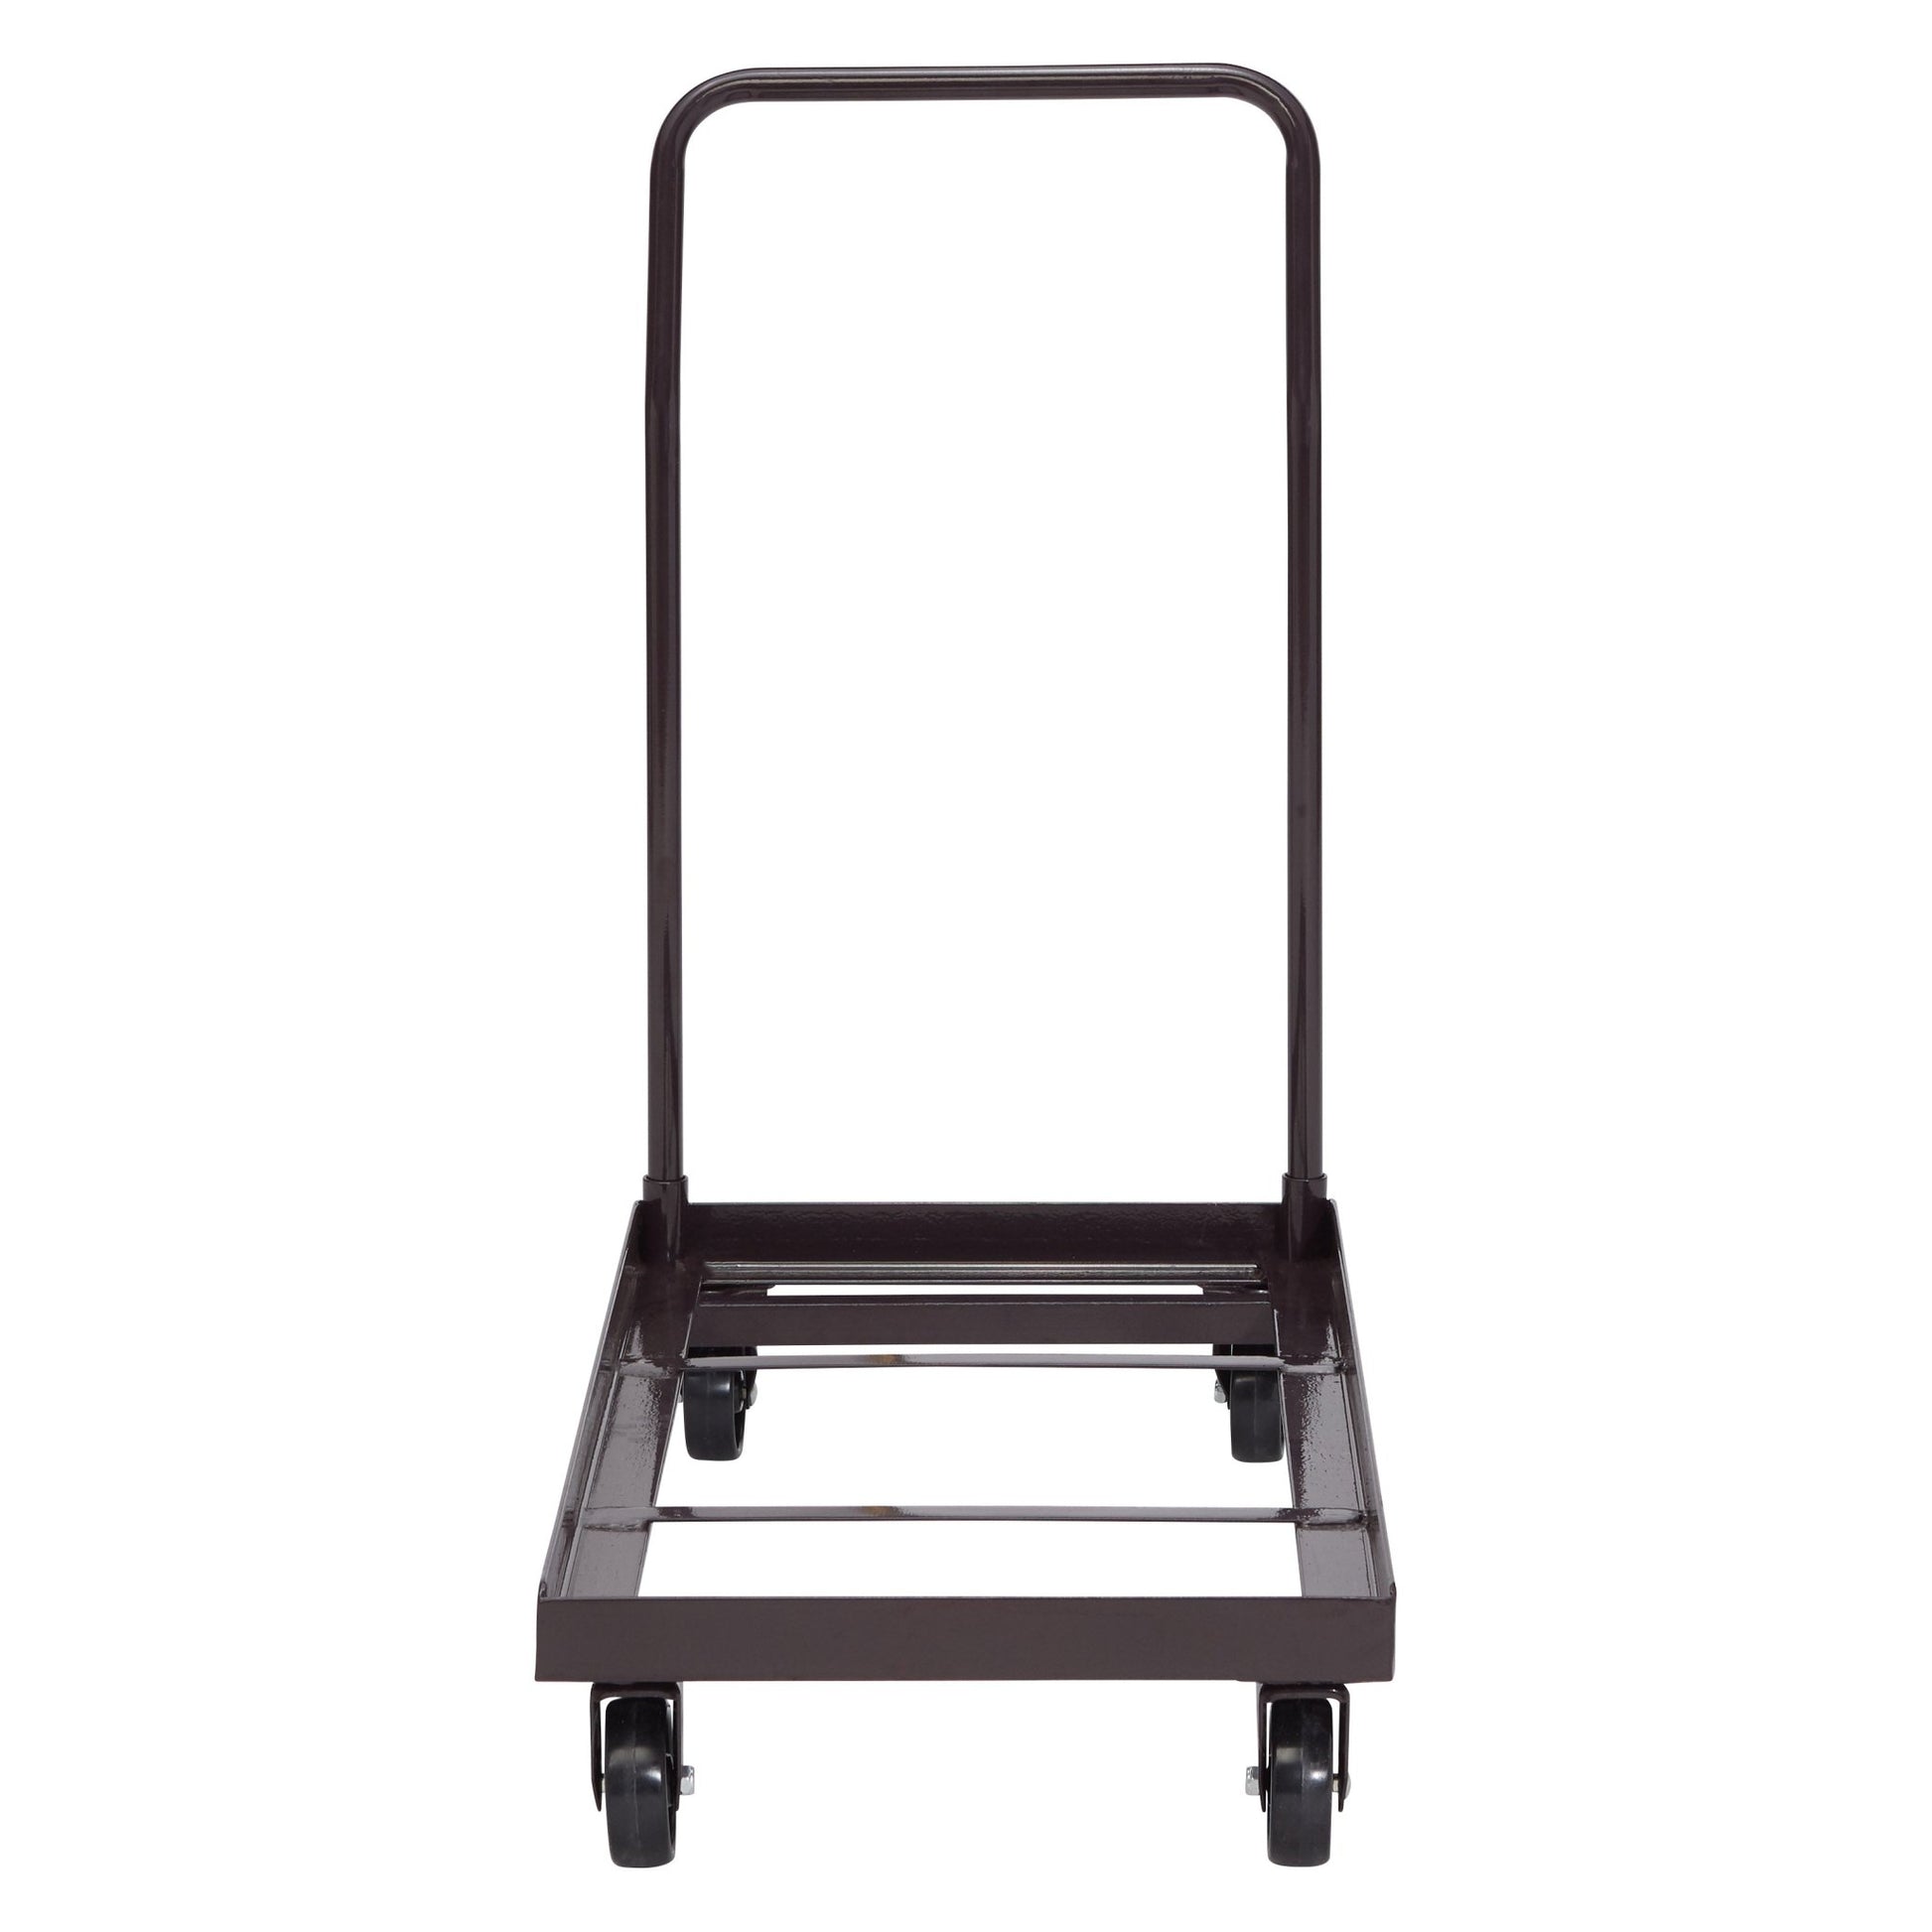 NPS Dolly for 700 and 800 Series Folding Chairs (National Public Seating NPS-DY-700/800) - SchoolOutlet